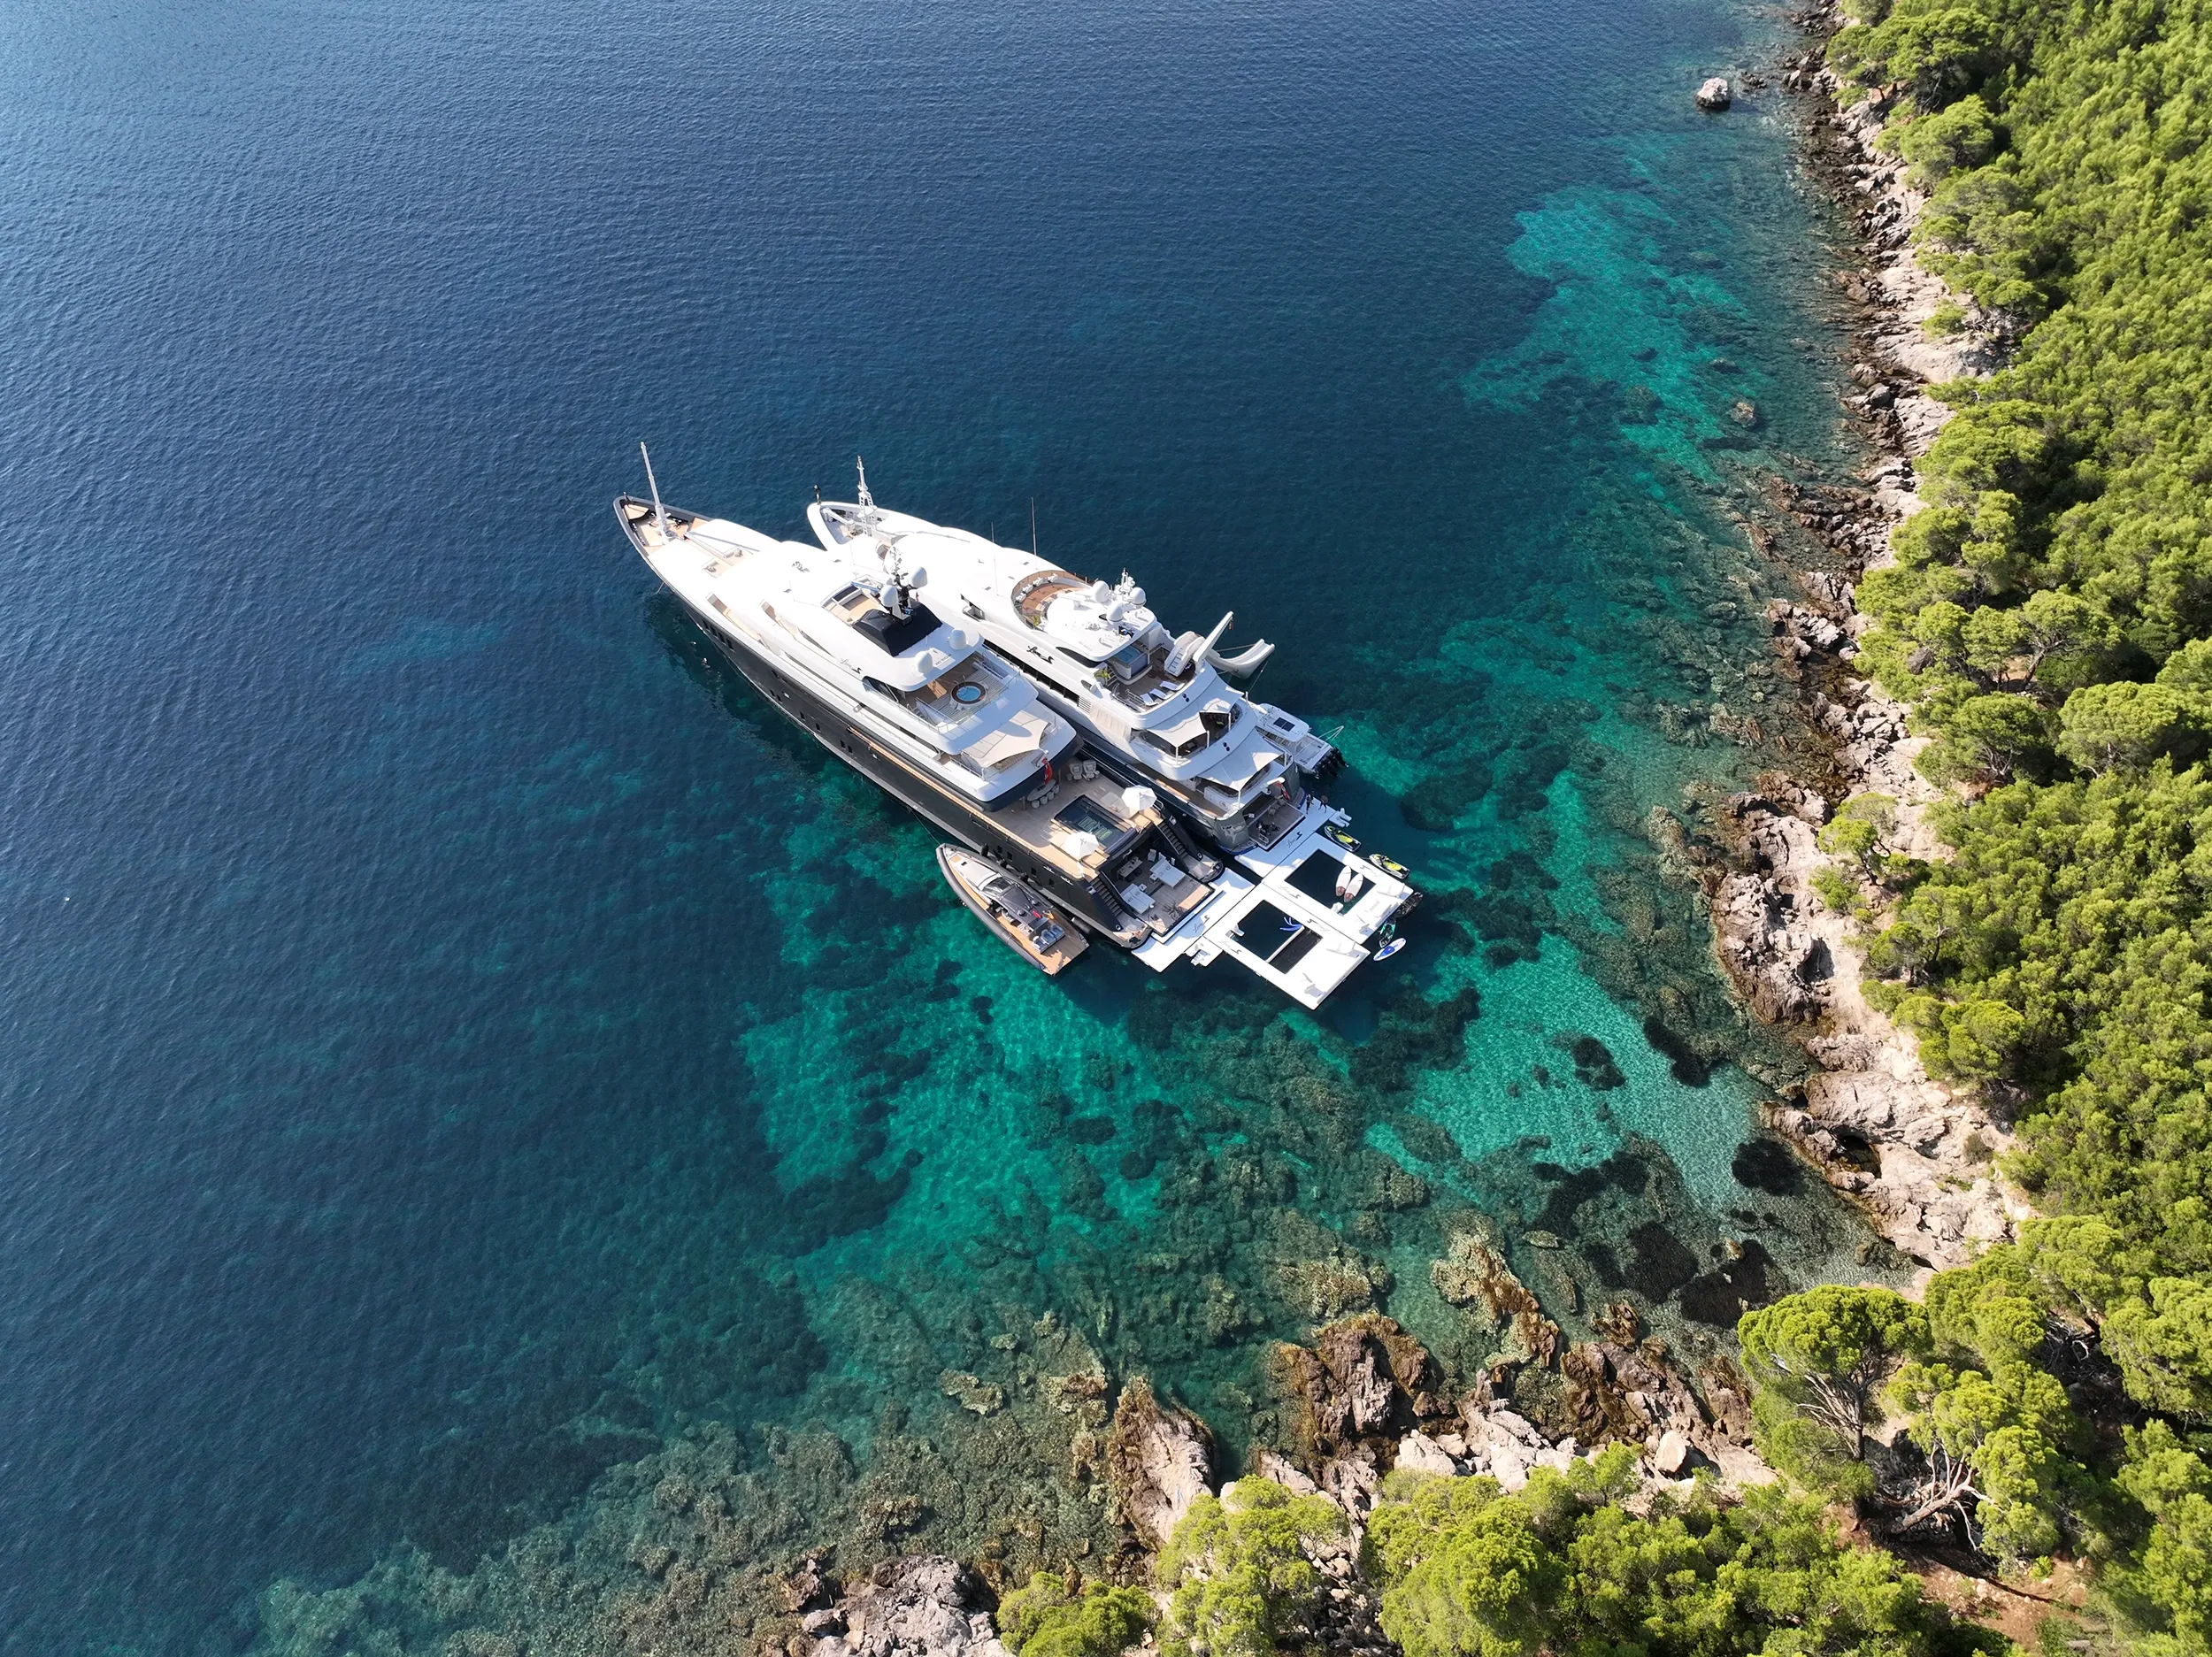 Sea Pool Yacht Slide Loungers MY Loon 221 and Loon 180 in tandem in Croatia overhead view anchored off rocky coast